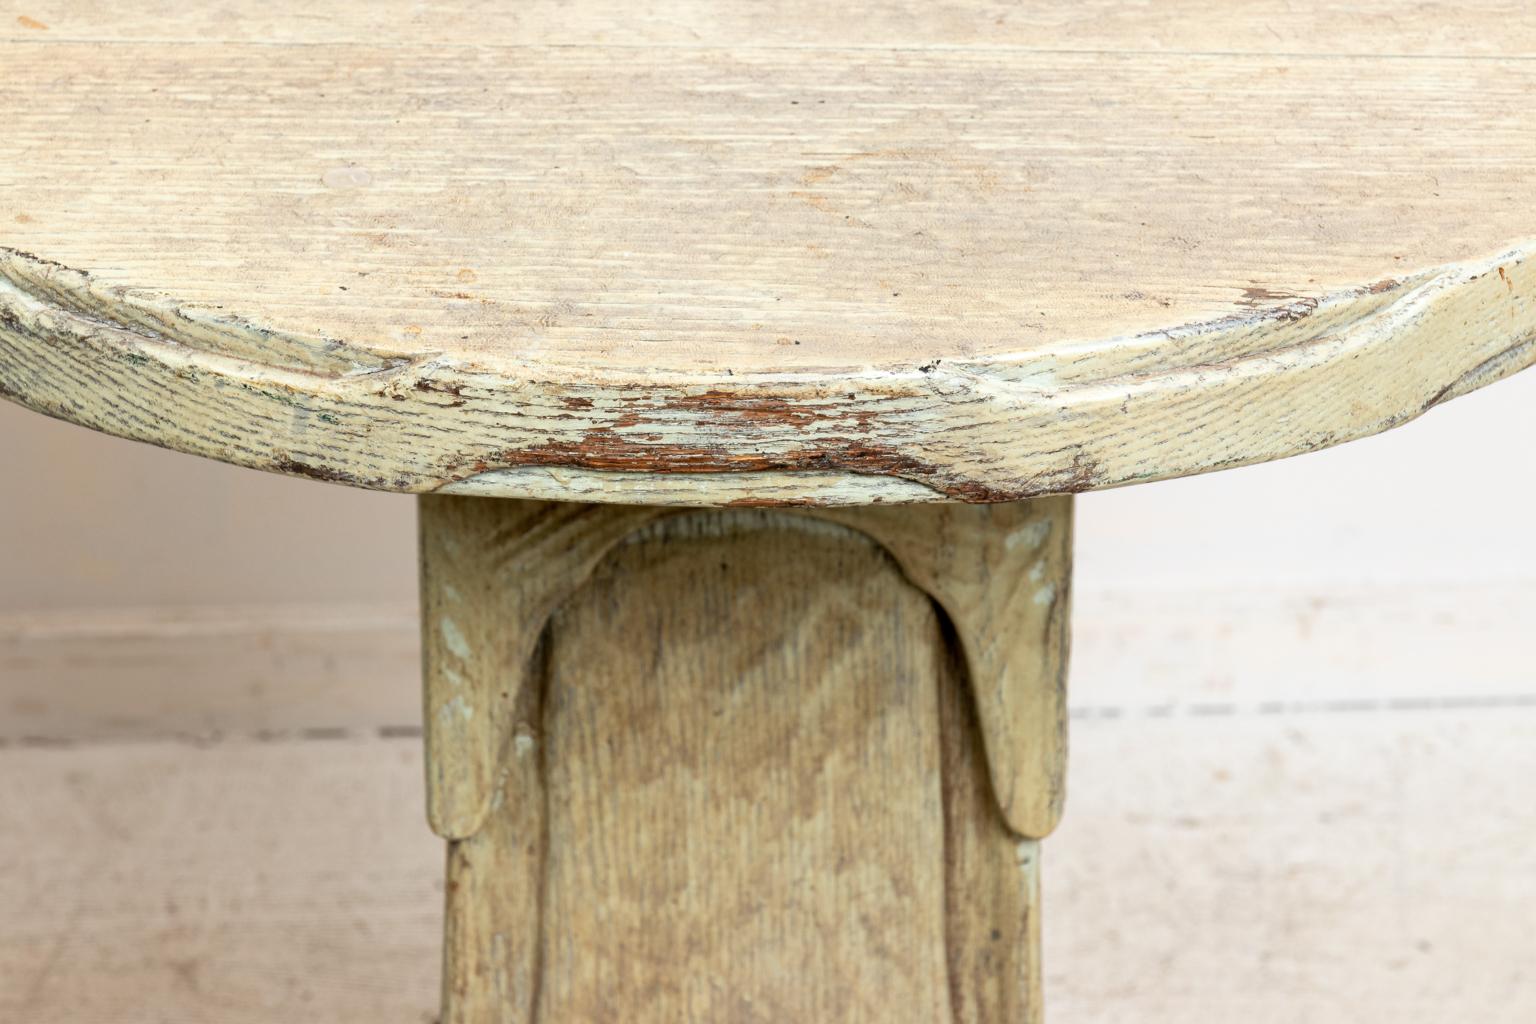 Pair of pedestal base side tables or stands in a distressed, rough hewn finish. Please note of wear consistent with age including distressed finish, patina, scratches, and chips to the wood.